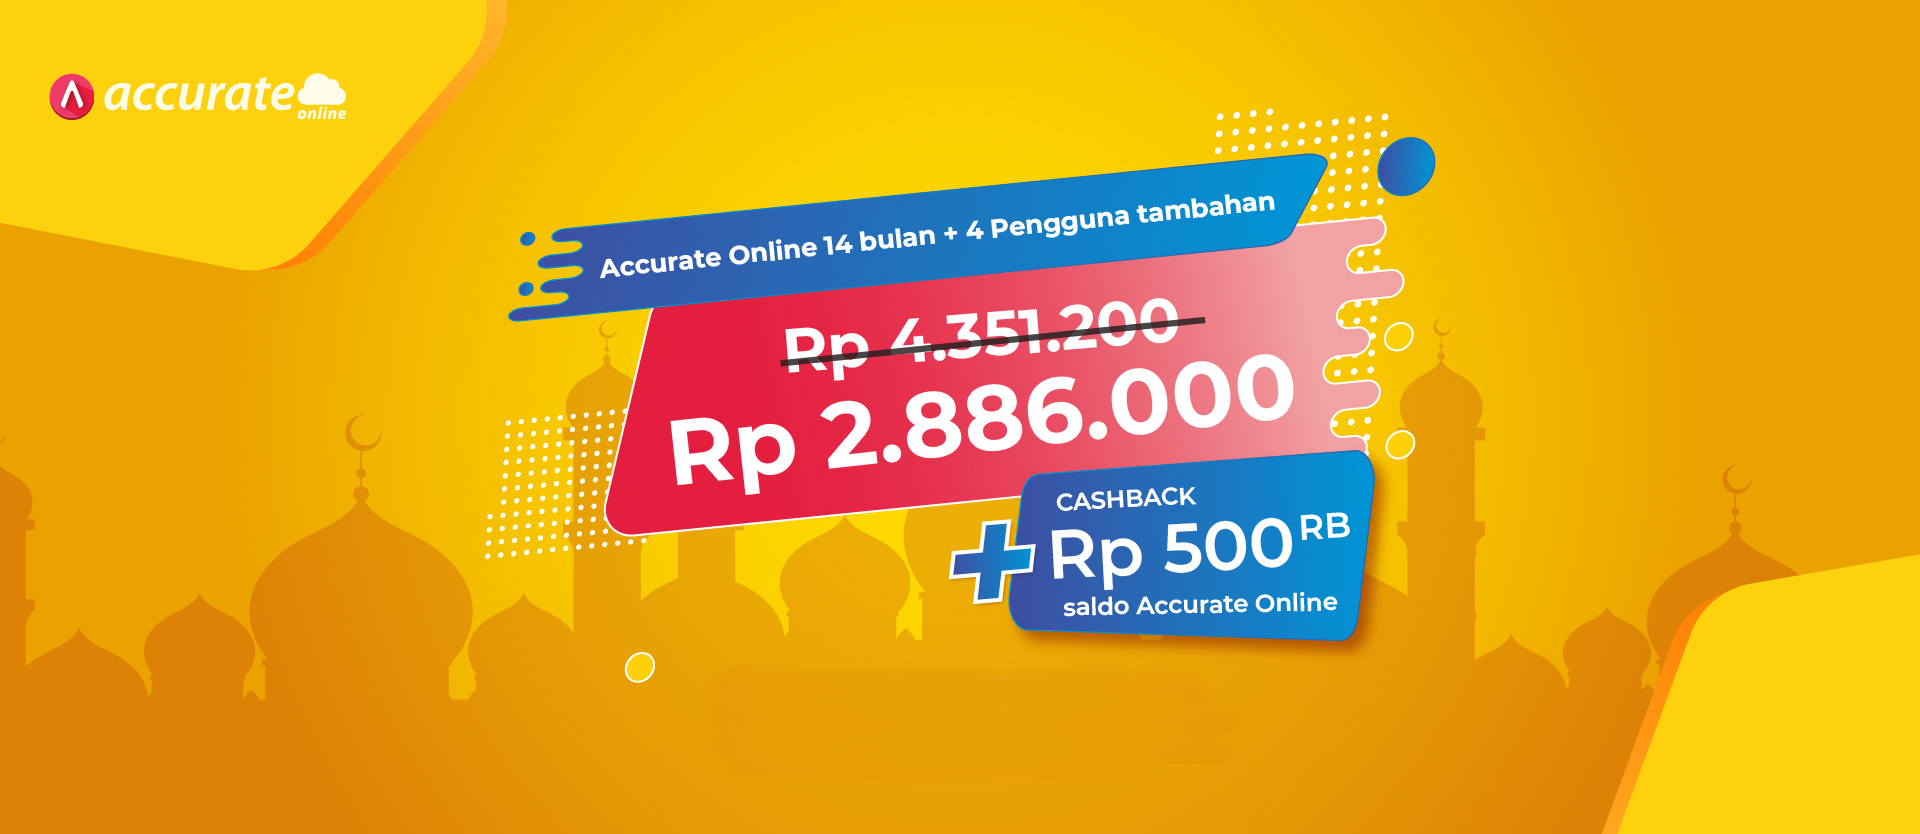 PROMO ACCURATE ONLINE CASHBACK